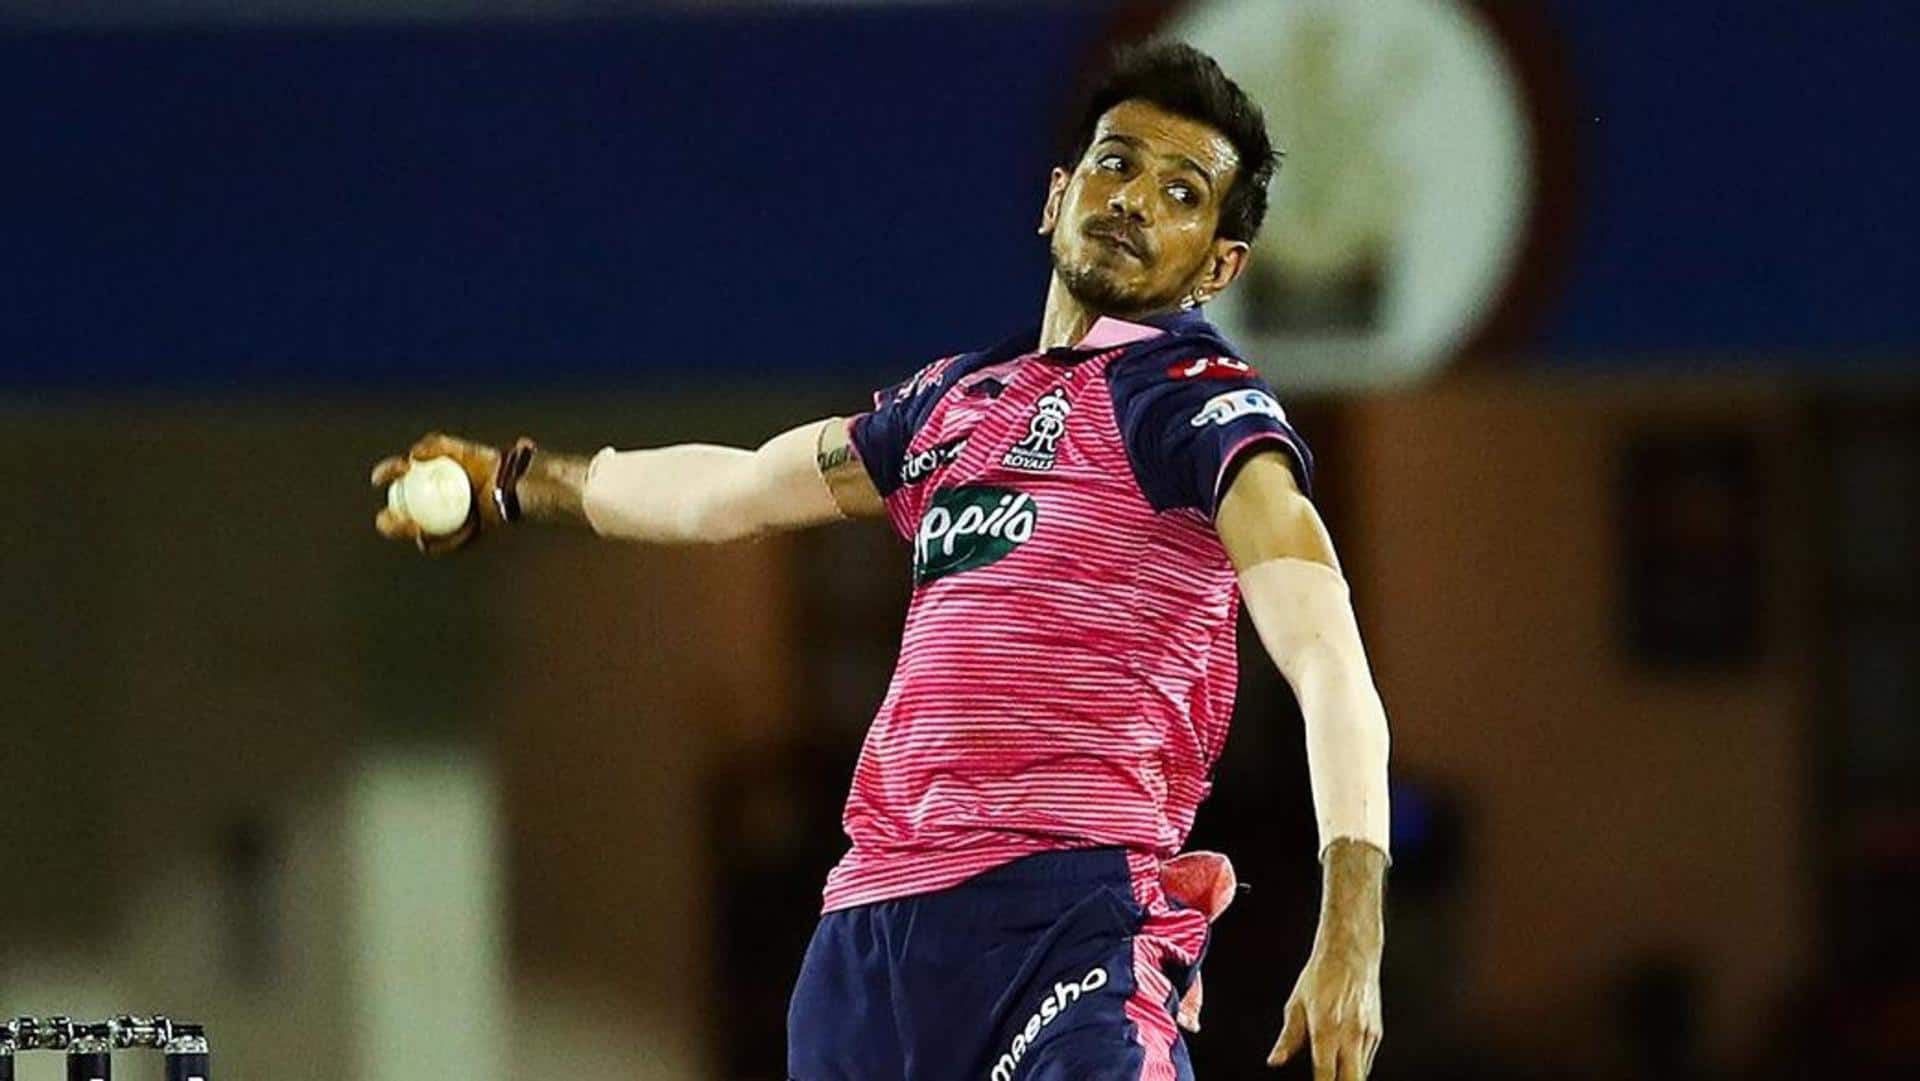 Indian Premier League: Yuzvendra Chahal could become the highest wicket-taker